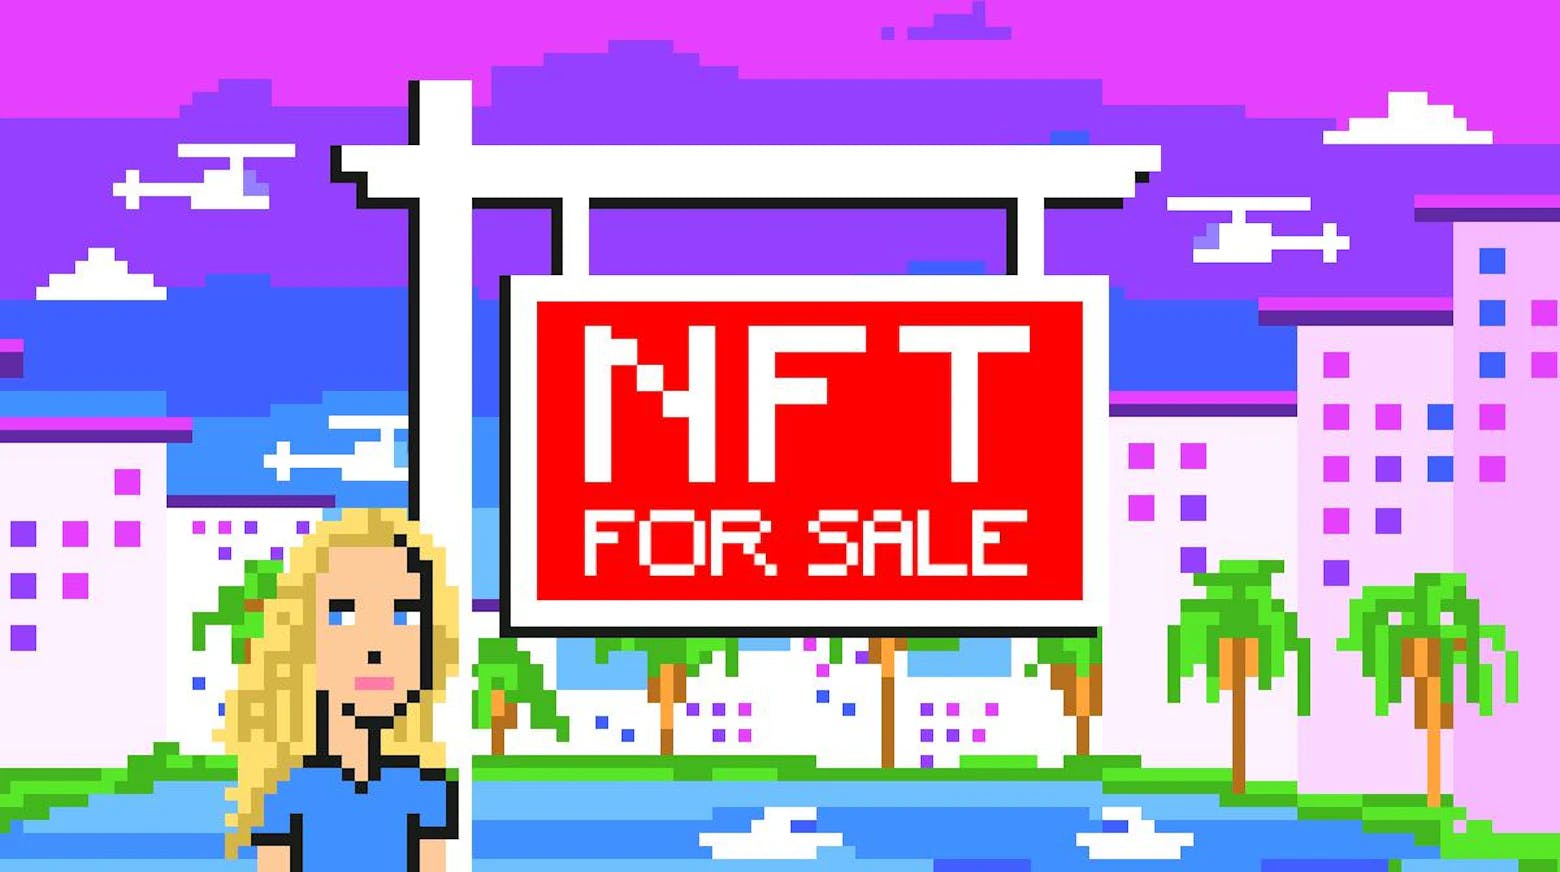 NFTs and real estate appear to go hand-in-hand.